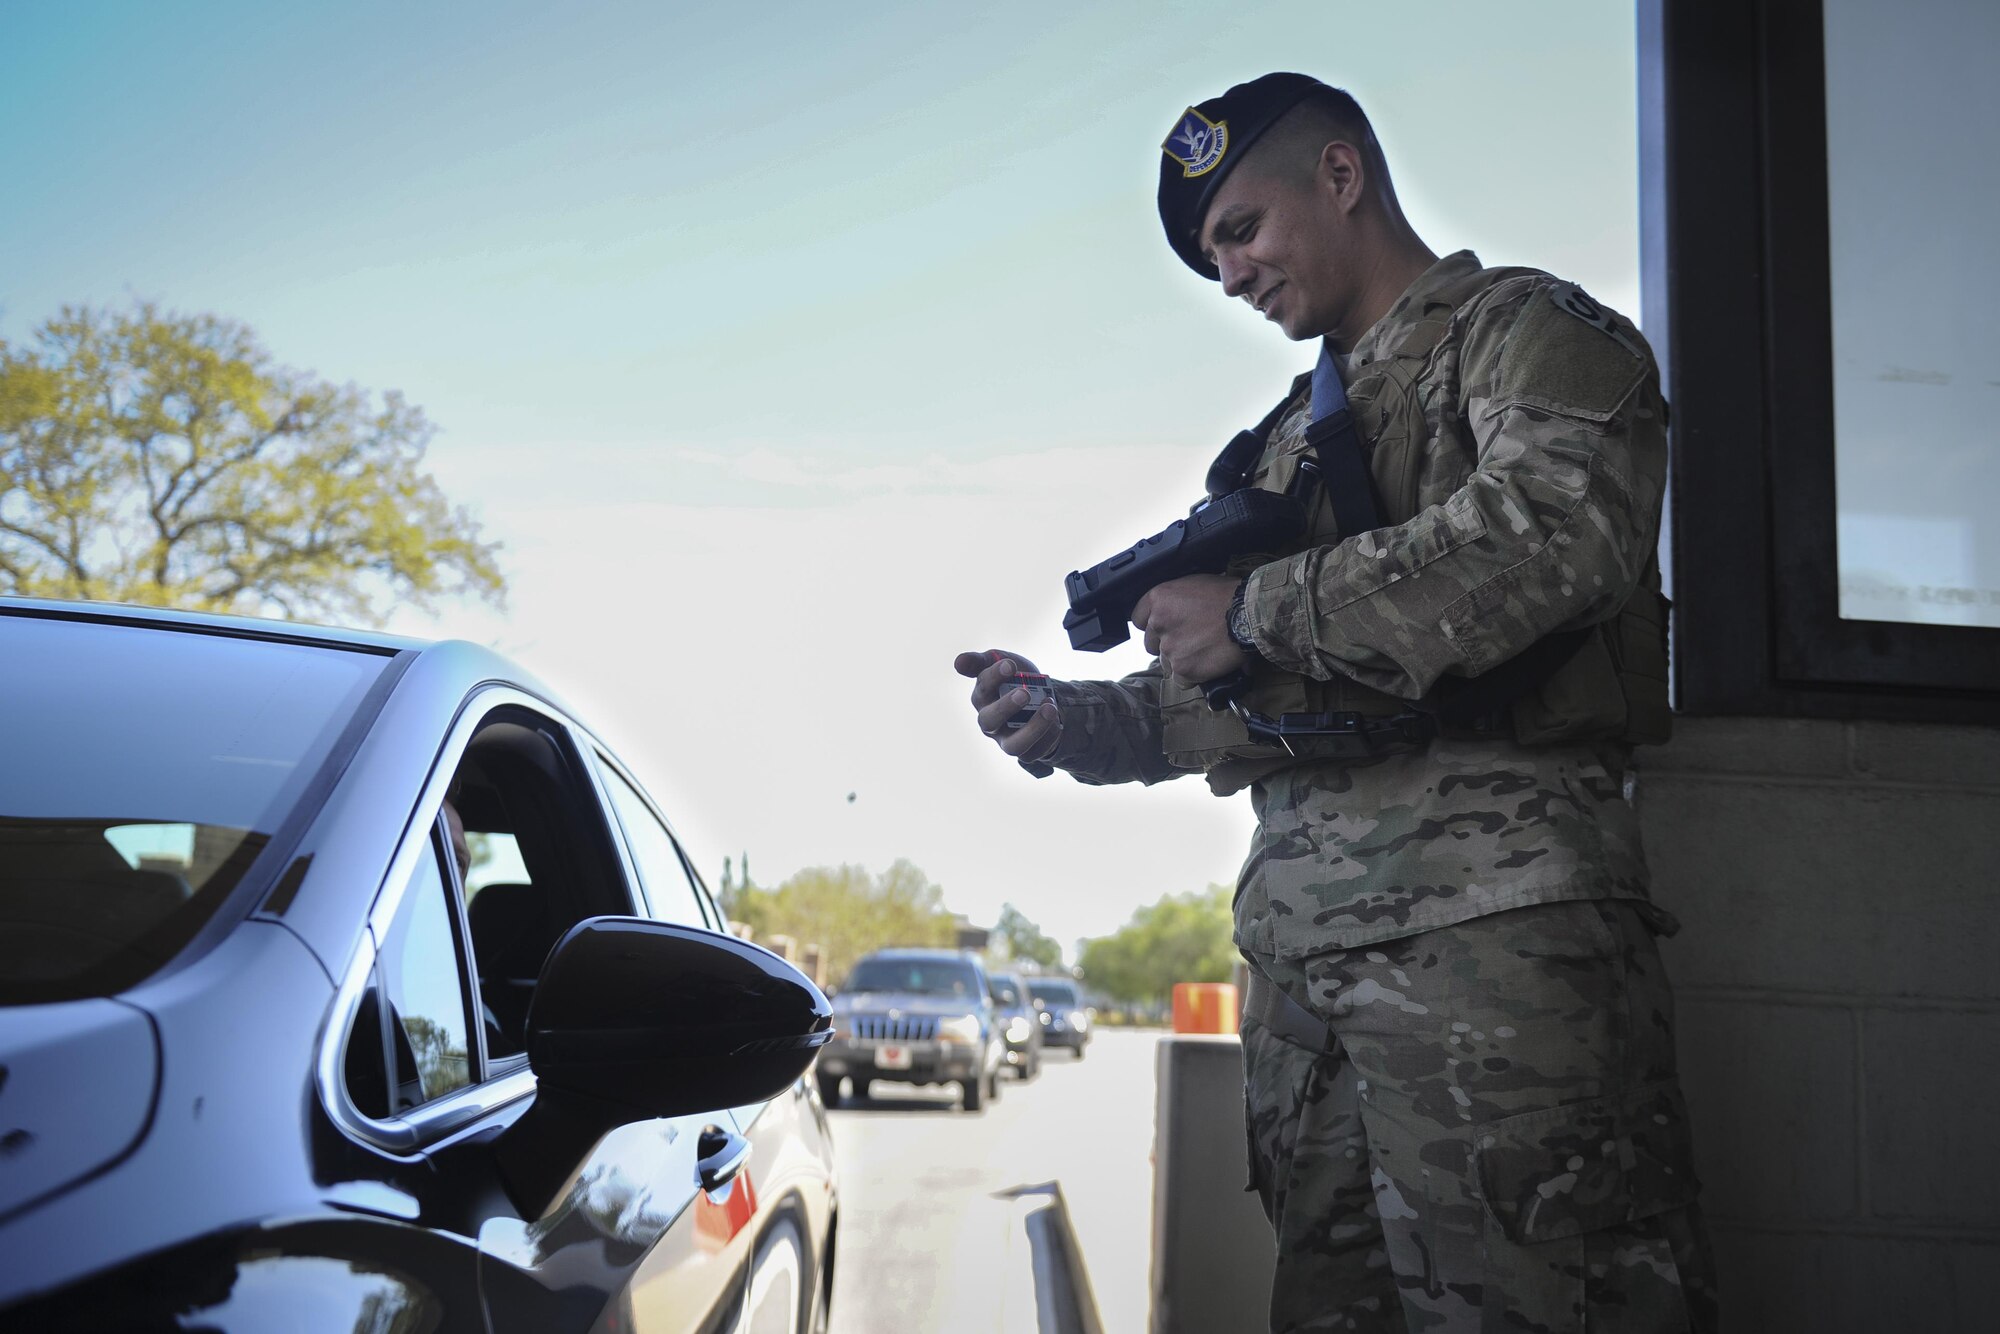 Airman Salvador Villa, an installation entry controller with the 1st Special Operations Security Forces Squadron, verifies a Common Access Card using the revamped Defense Biometrics Identification System at Hurlburt Field, Fla., April 7, 2017. DBIDS is a force-protection tool in the form of a handheld ID card scanner. The scanner is used at gate checkpoints to improve traffic flow and boost security. (U.S. Air Force photo by Airman 1st Class Dennis Spain)